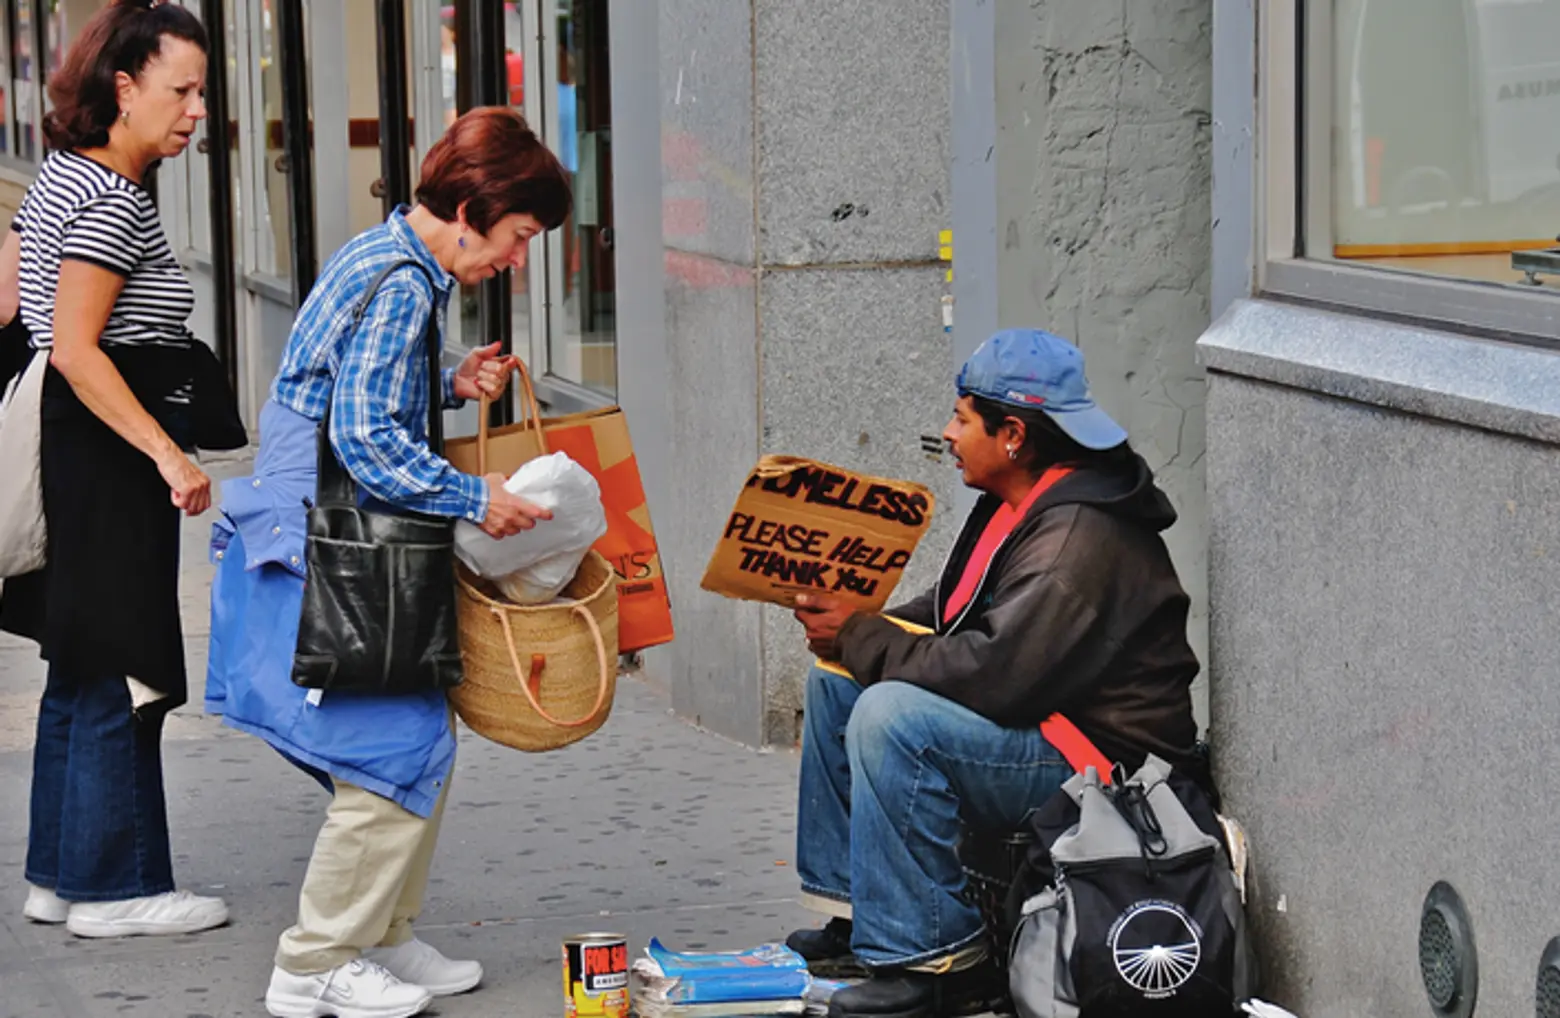 60 percent of New Yorkers could be on the brink of homelessness